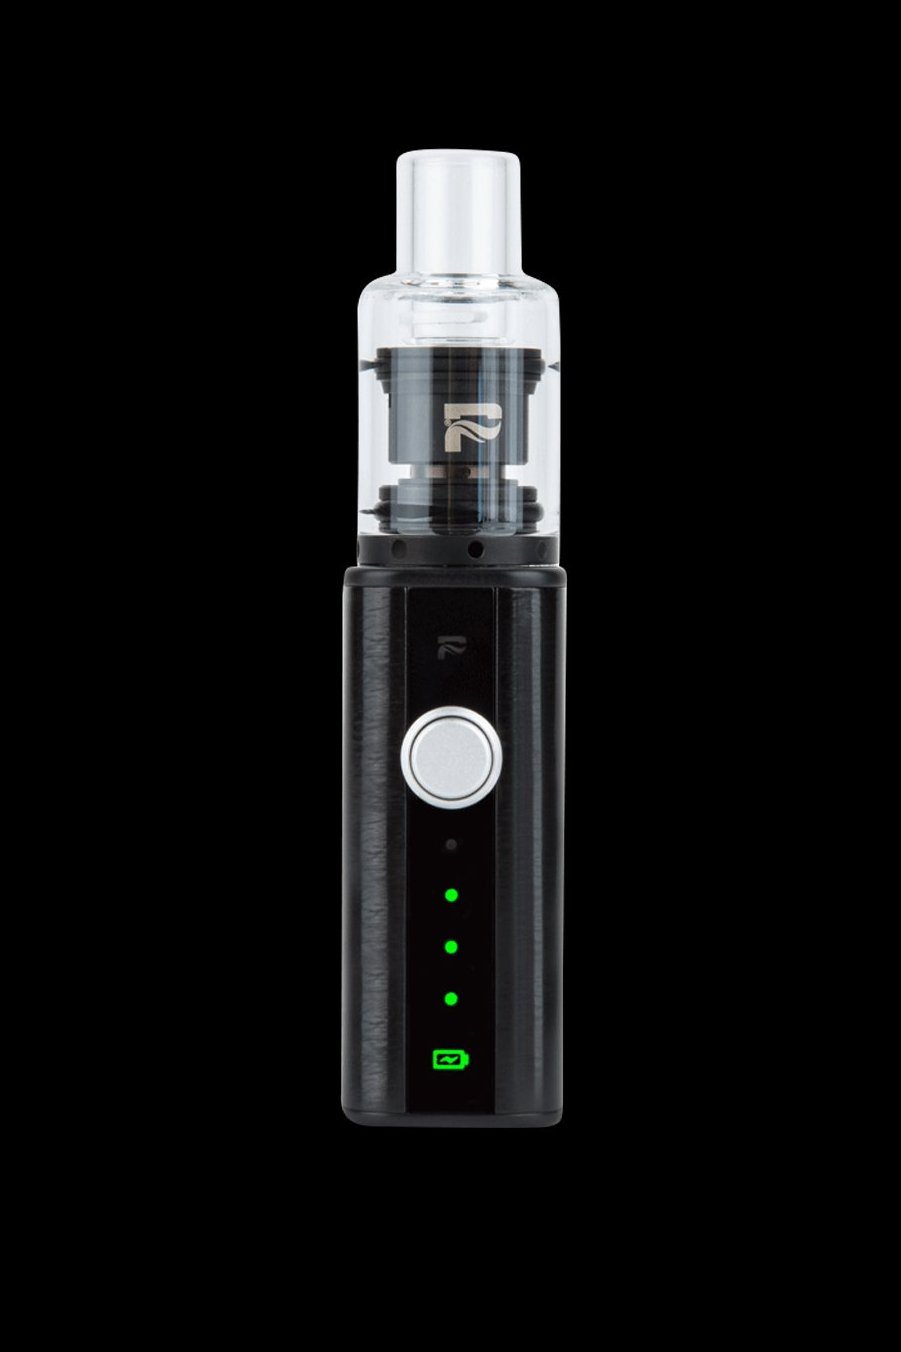 Pulsar APX Wax V3 Portable Concentrate Vaporizer Best Sales Price - Vaporizers